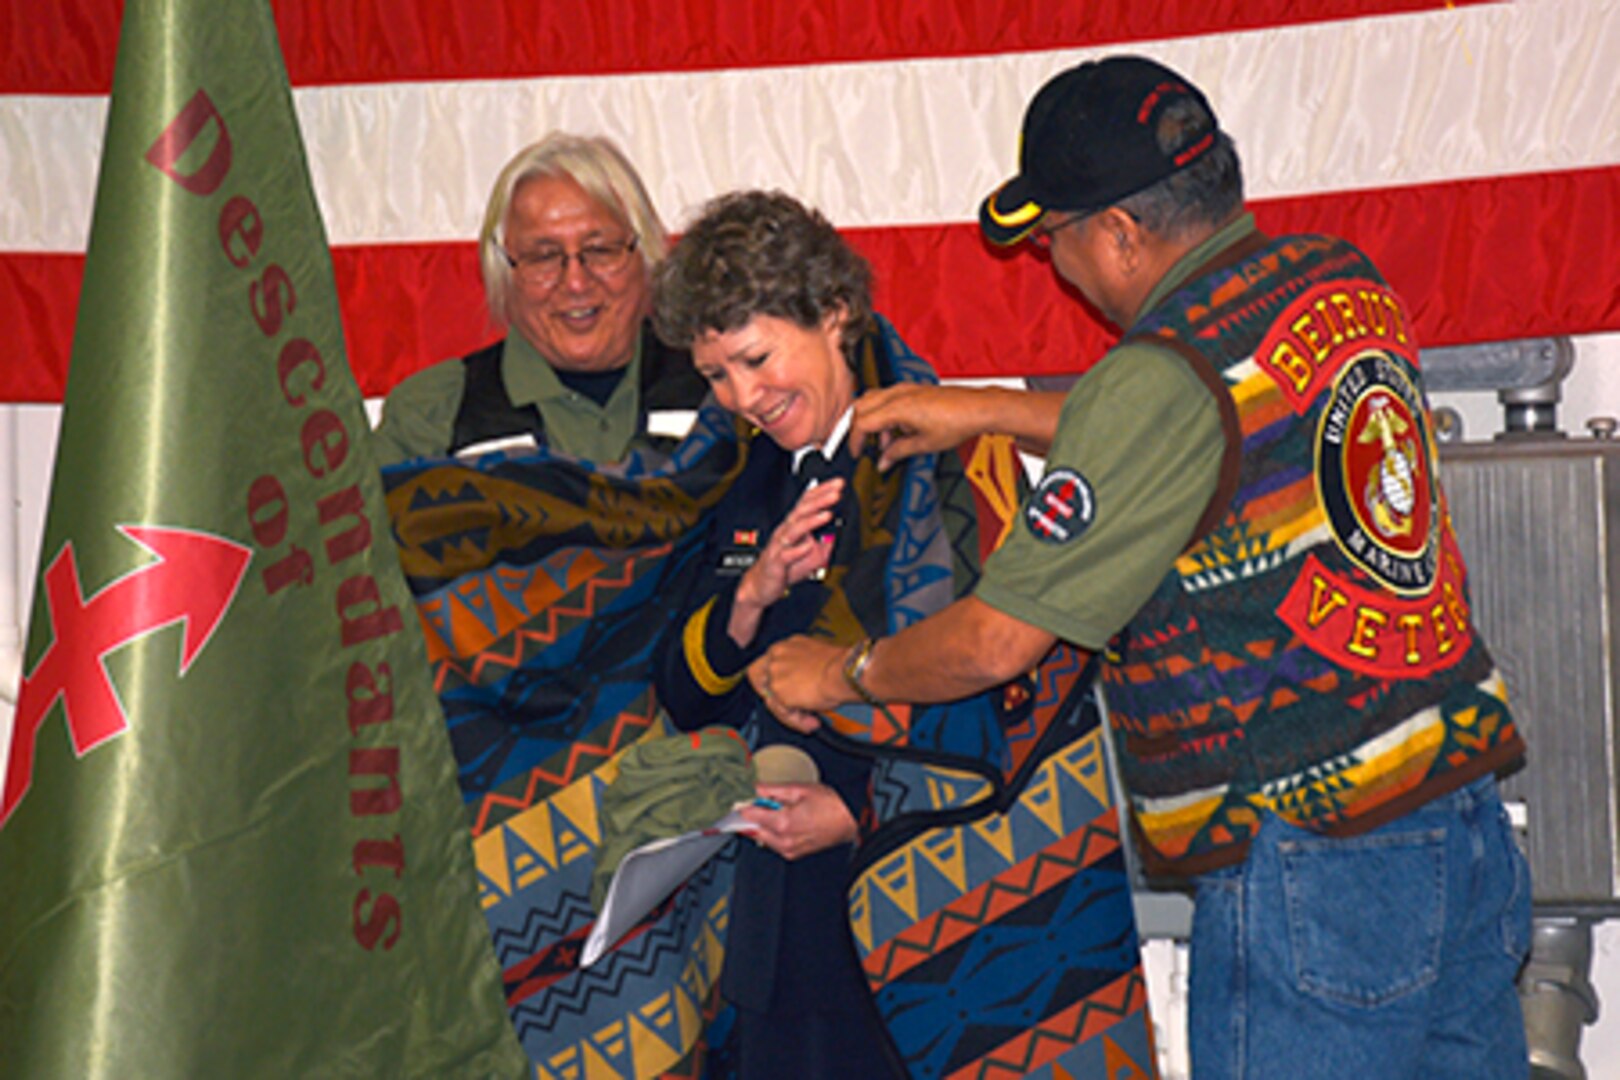 Wisconsin National Guard Brig. Gen. Joane Mathews receives a ceremonial blanket as a sign of respect and honor after speaking at the 40th Annual Descendants of Red Arrow Veterans Day Pow-Wow Nov. 11, 2017. The Volk Field ceremony honored 28 Native Americans who served in the Wisconsin National Guard’s Company D, 128th Infantry, 32nd Division, during World War I.